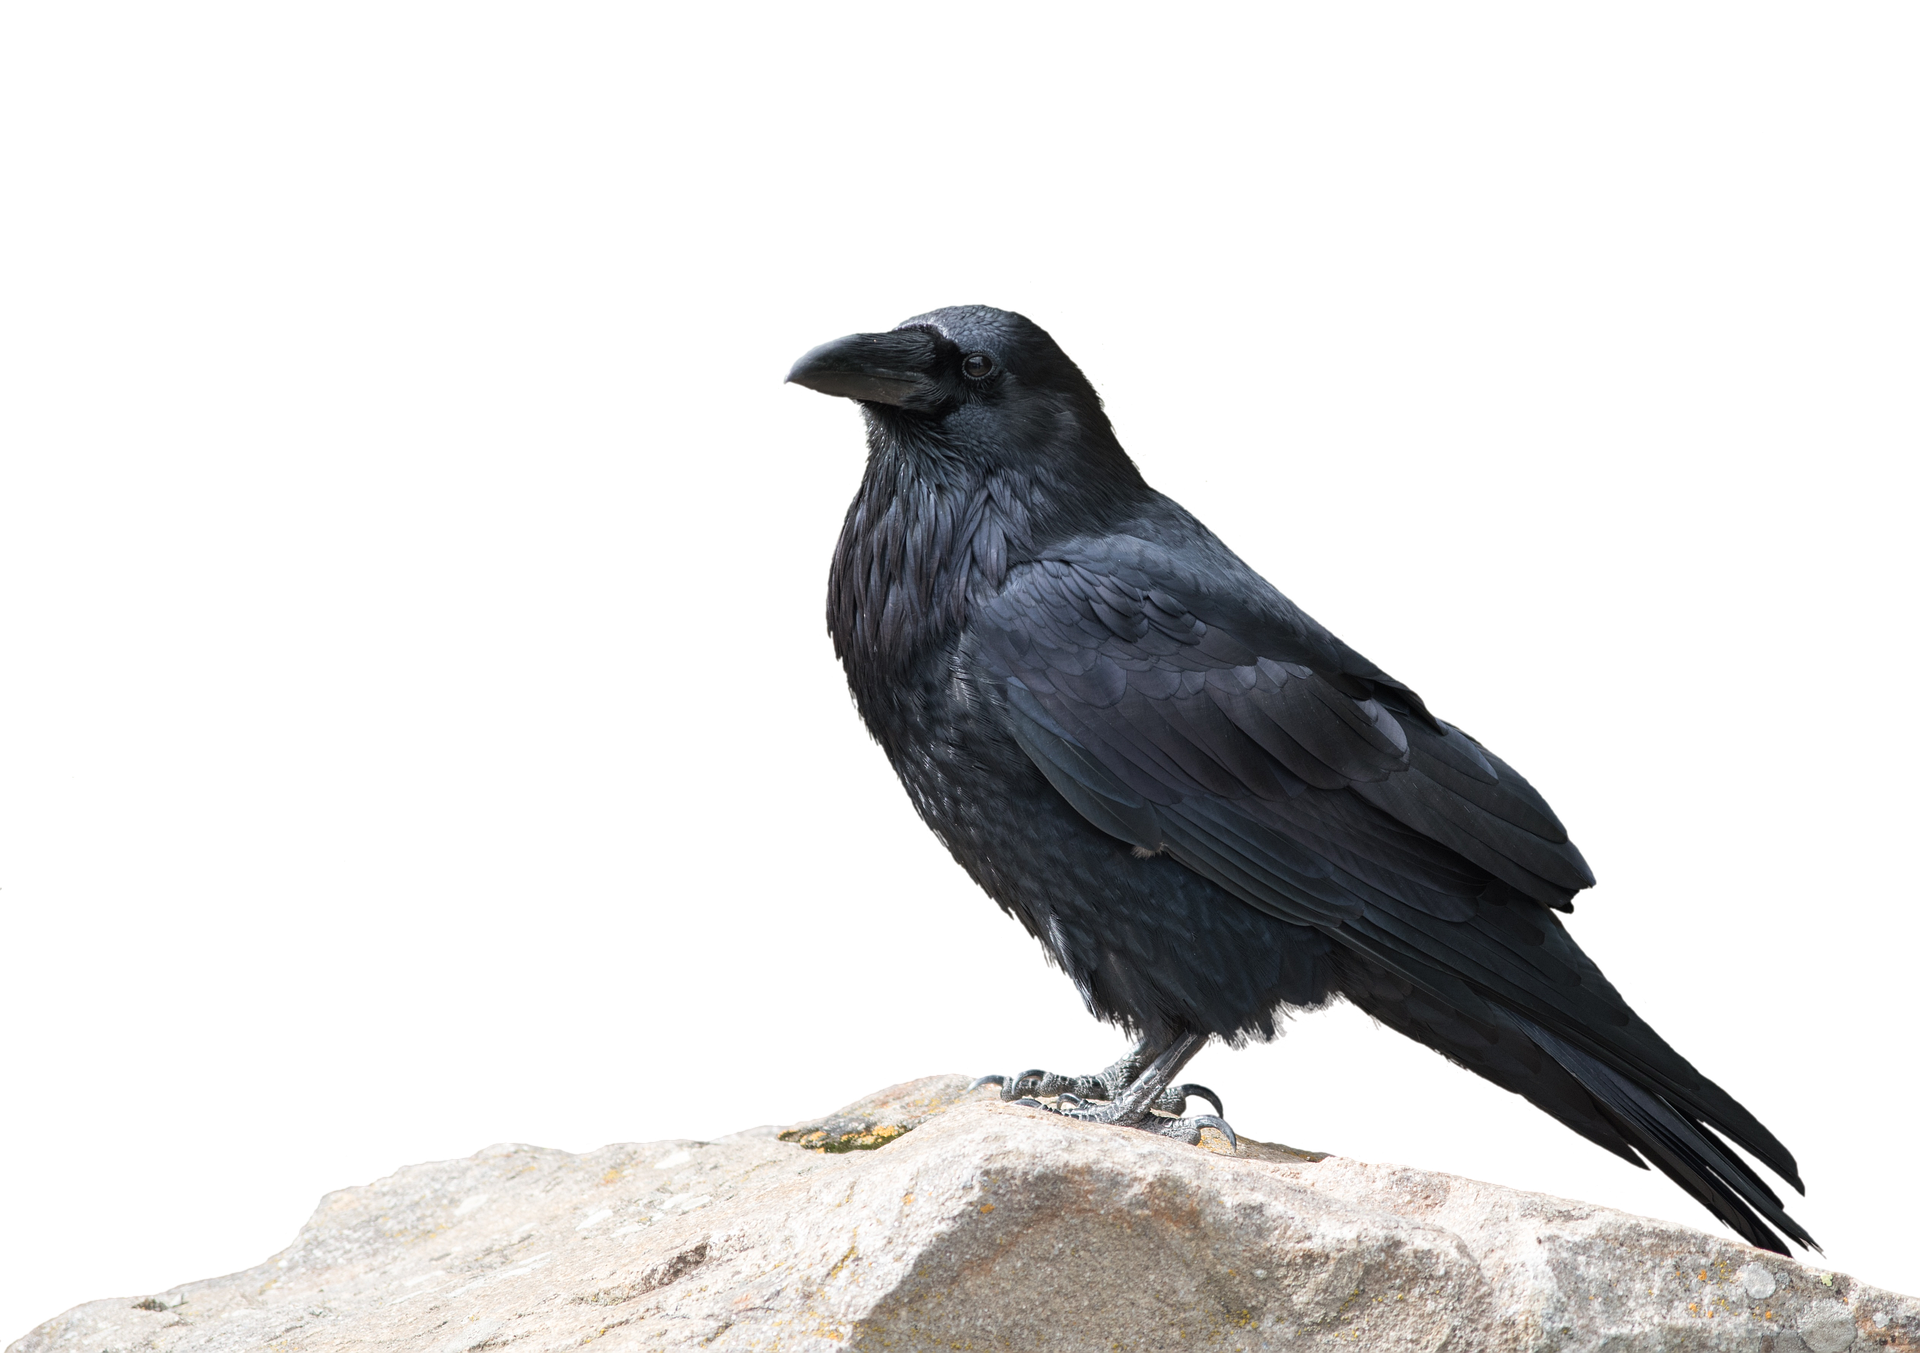 Why crows are shouting at night